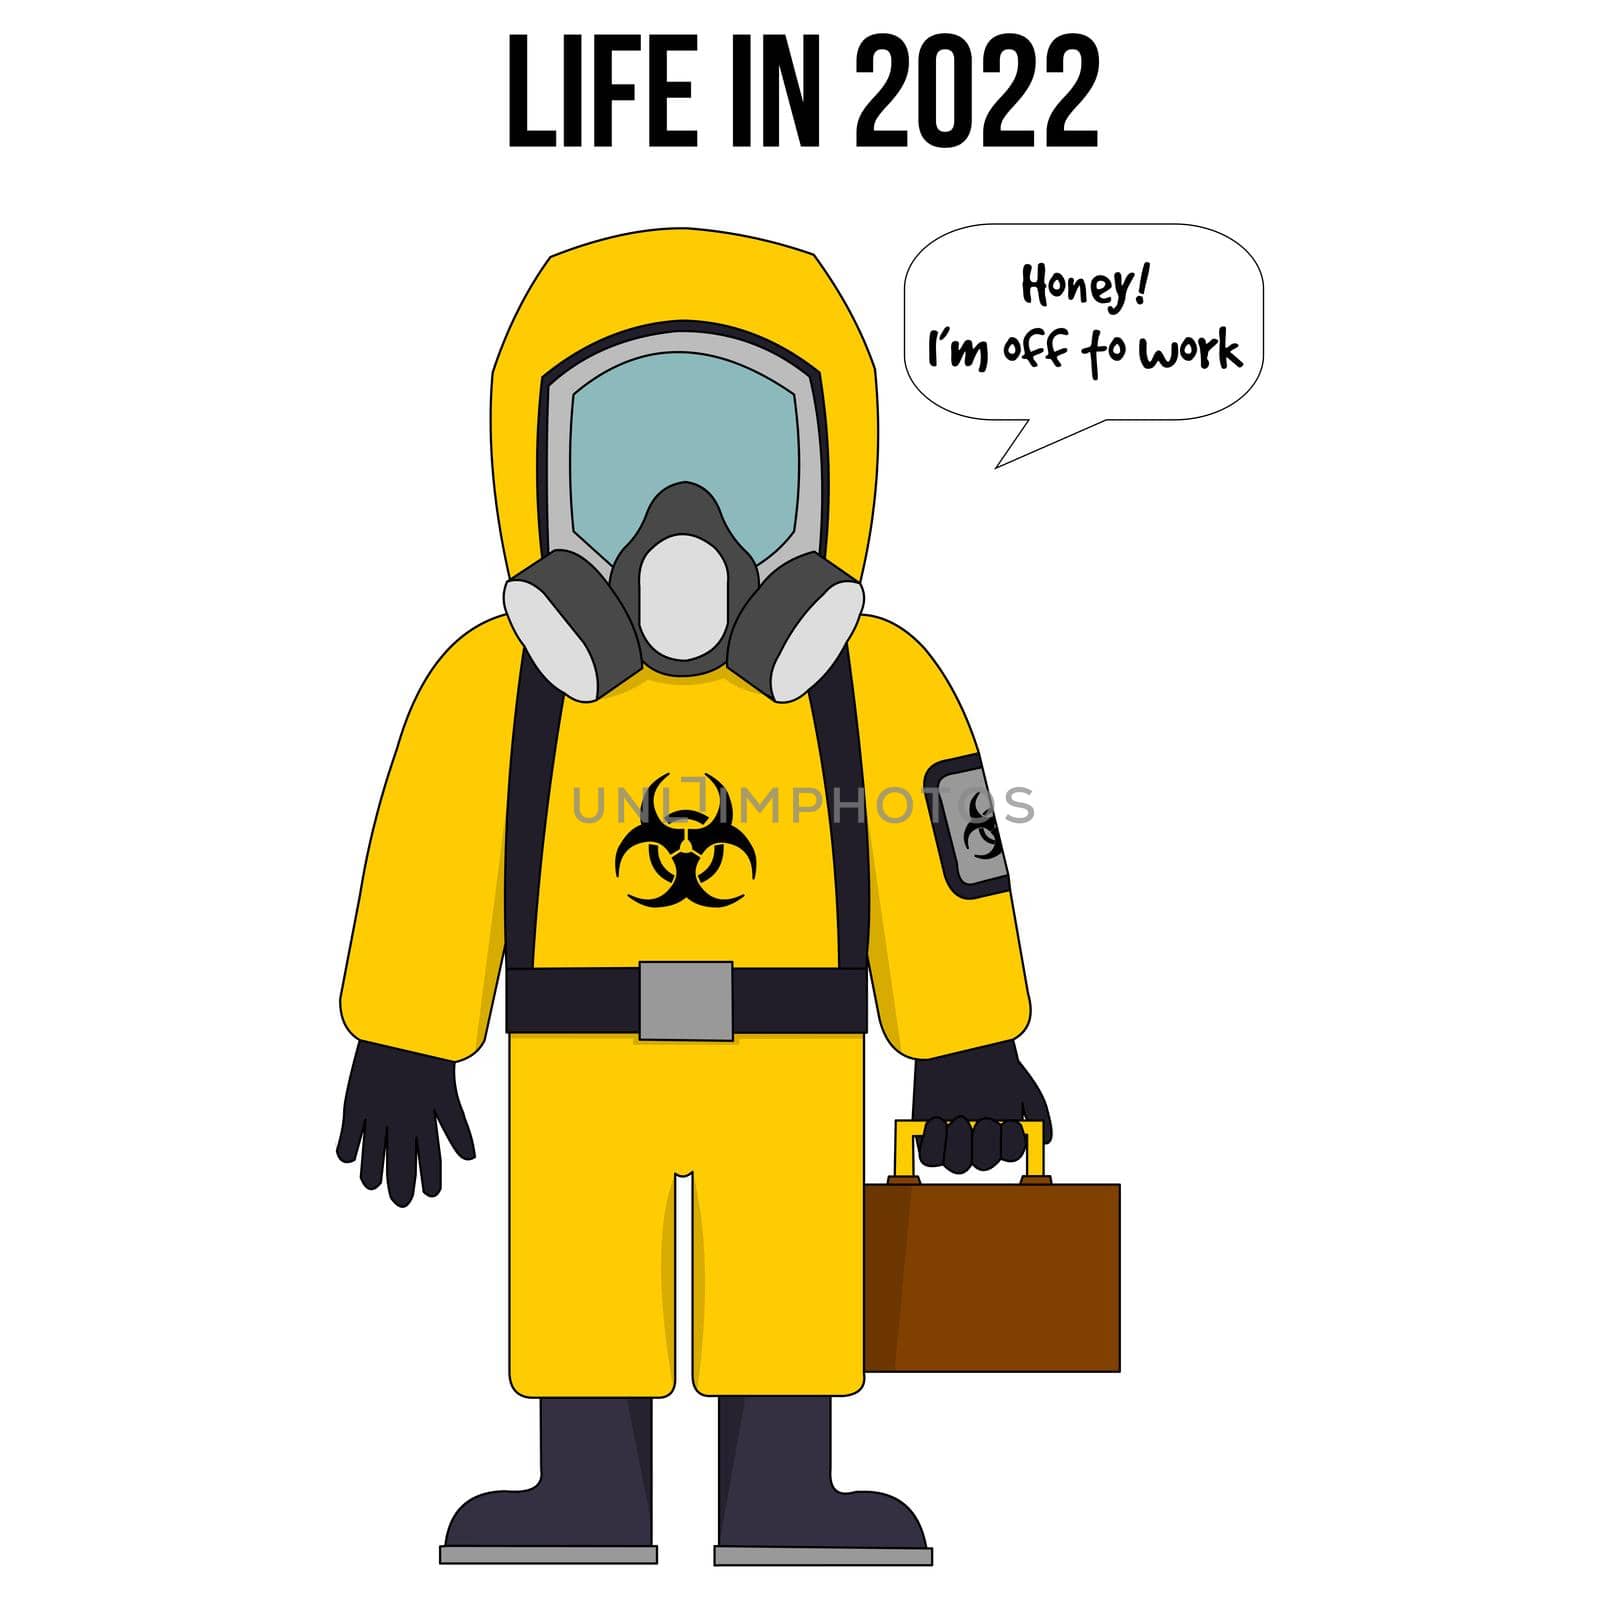 A person holding a suitcase going to work wearing a hazard suit with the text "life in 2022".